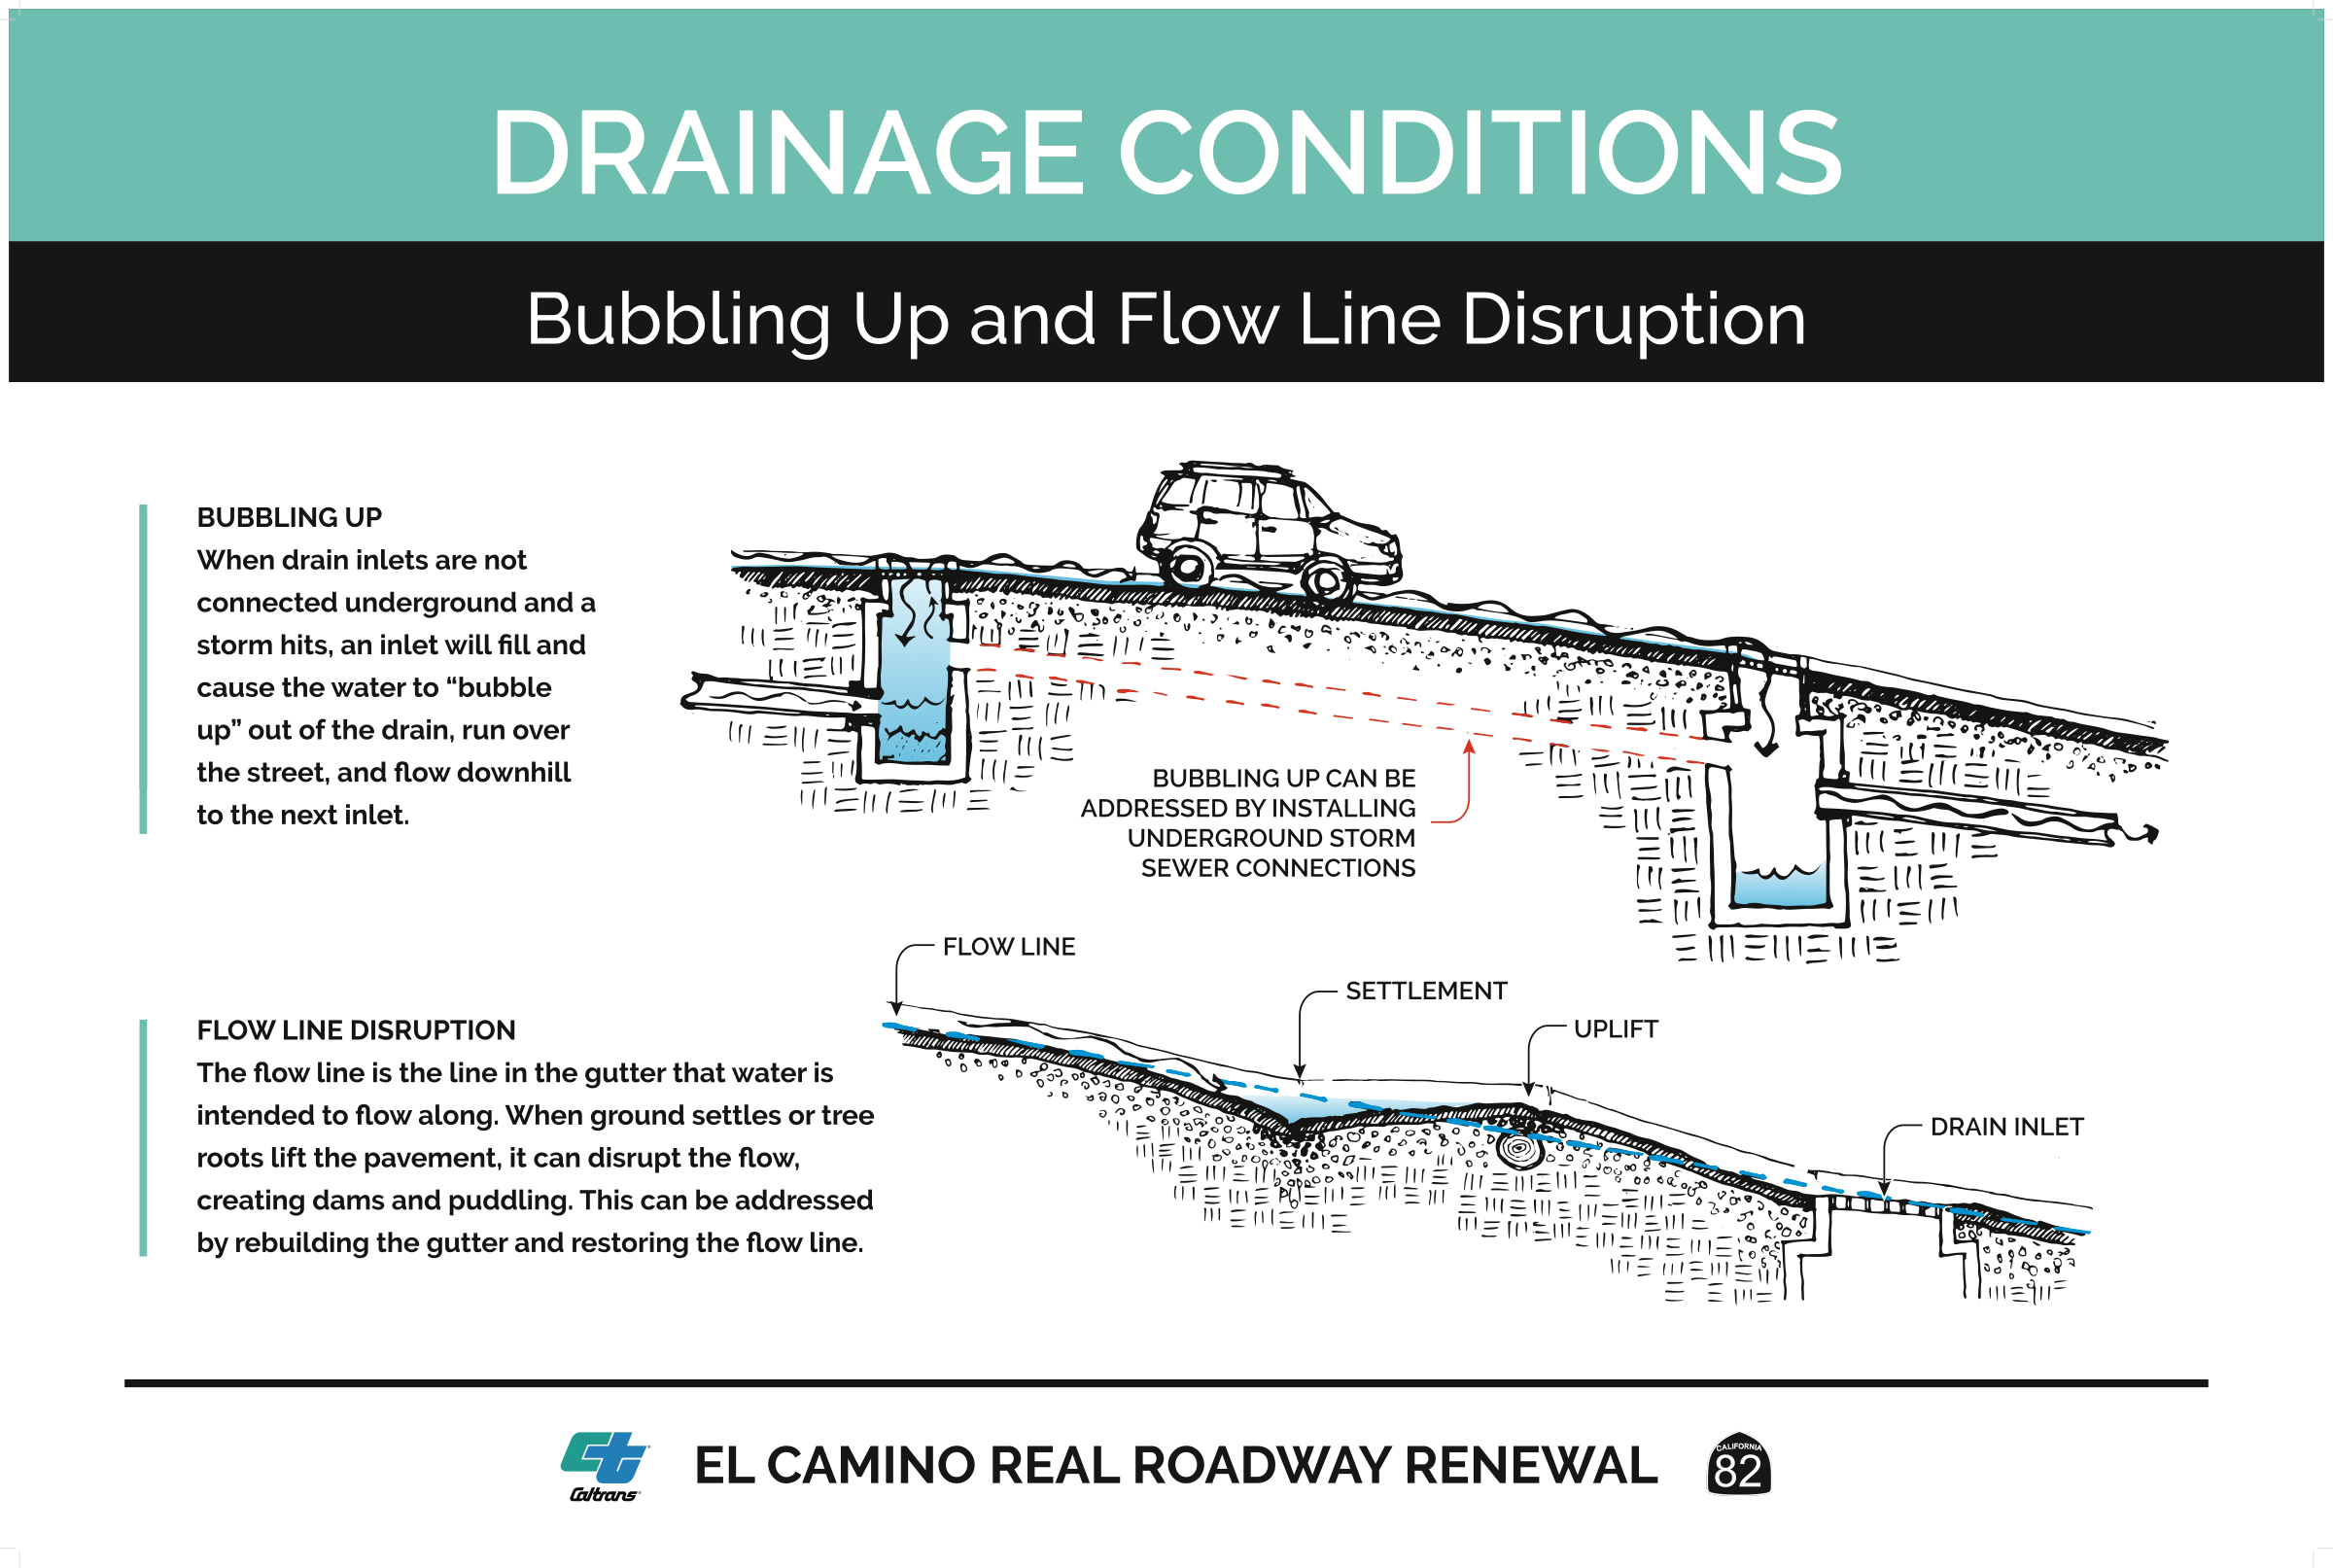 drainage conditions - bubbling up and flow line disruption